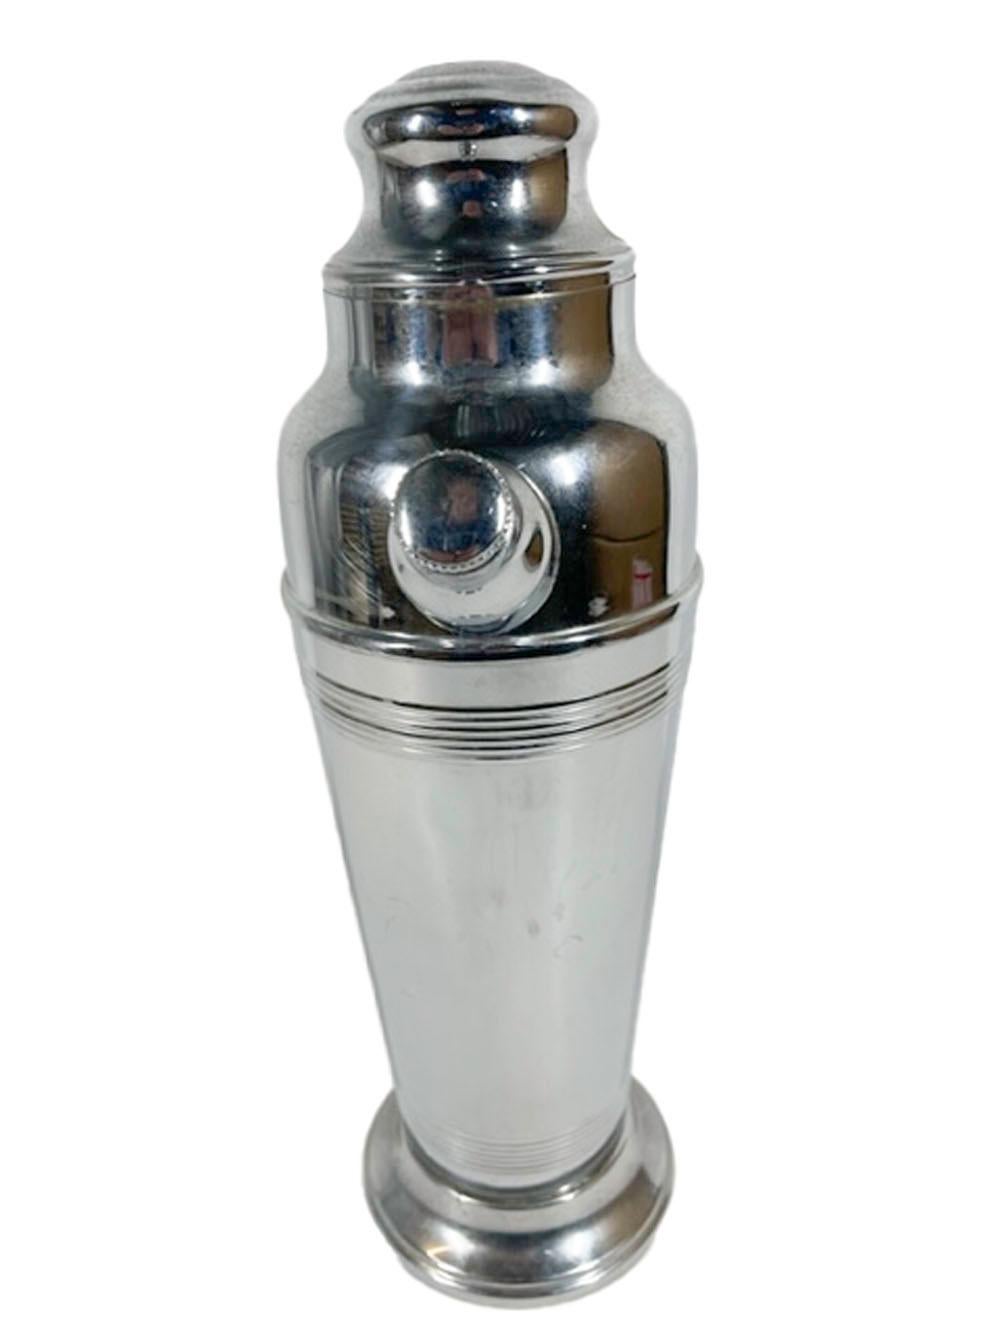 Art Deco chrome cocktail shaker with a translucent red Lucite handle. The urn-form body embellished with a reeded band just below the shoulder seam and another just above the stepped foot. Marked on the bottom in circular text 